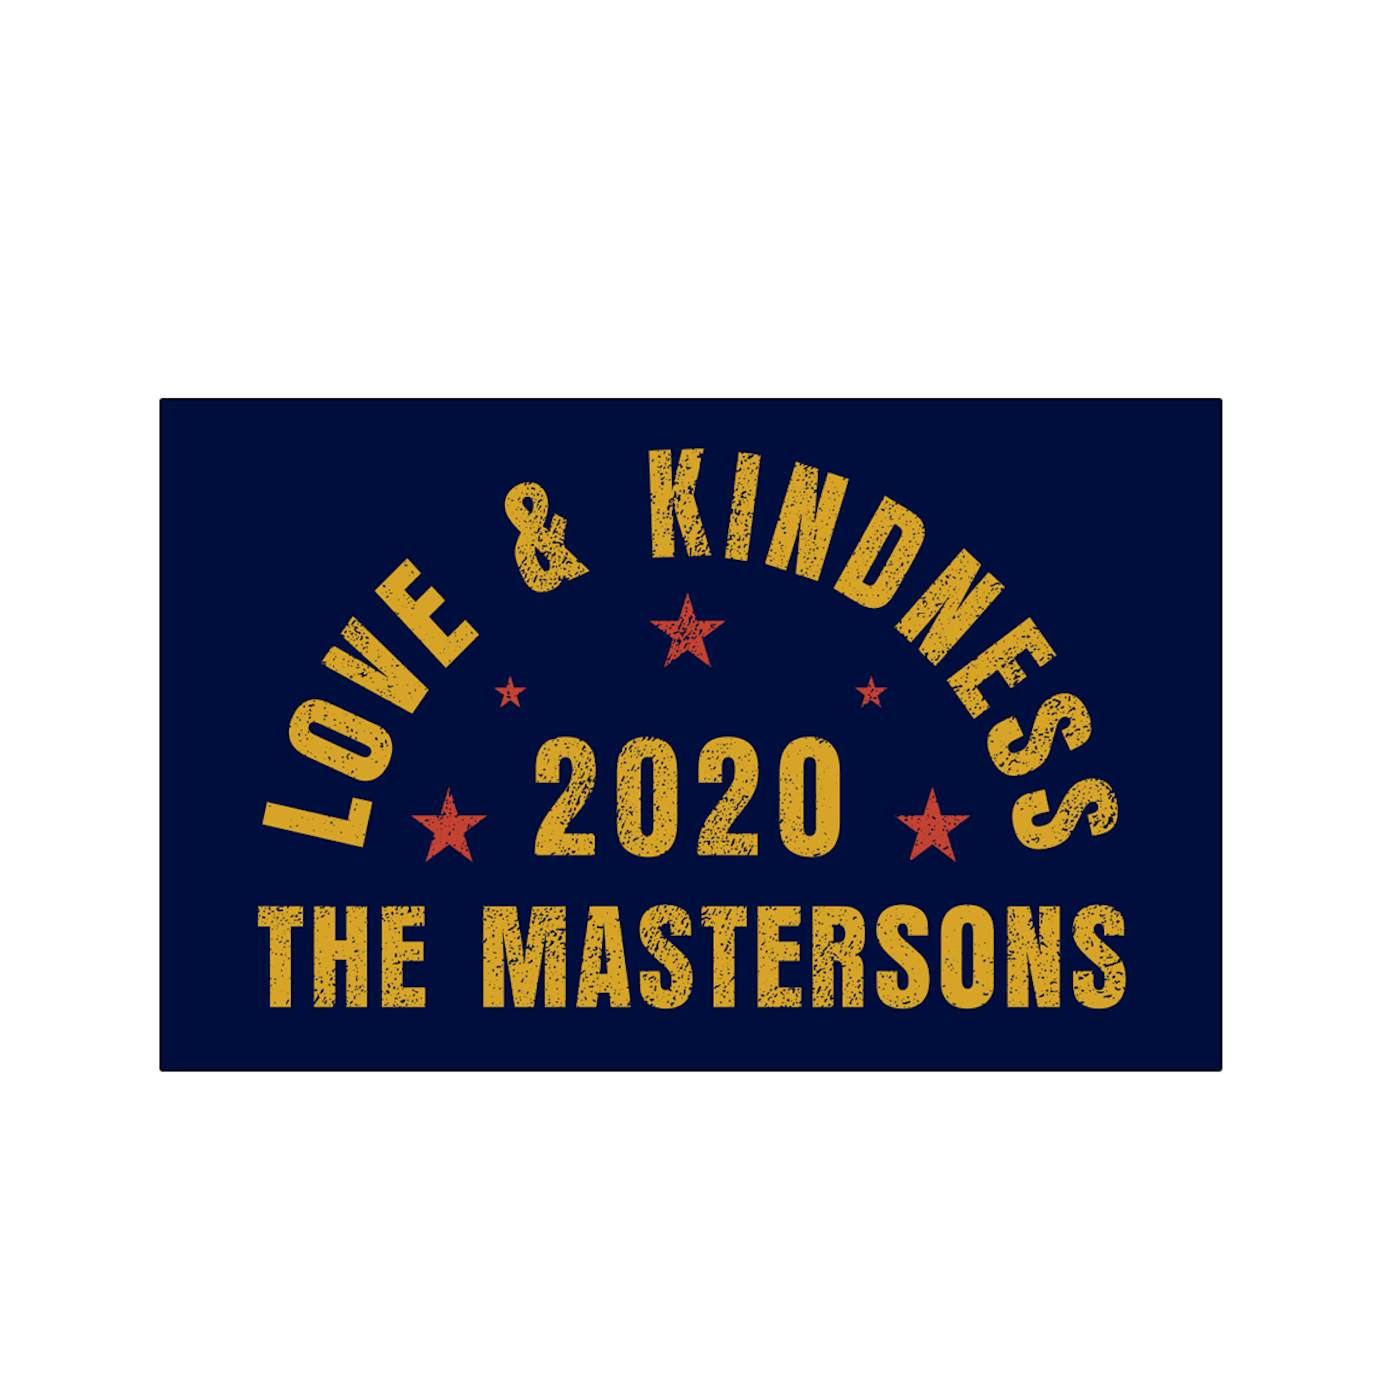 The Mastersons | Mastersons 2020 Sticker